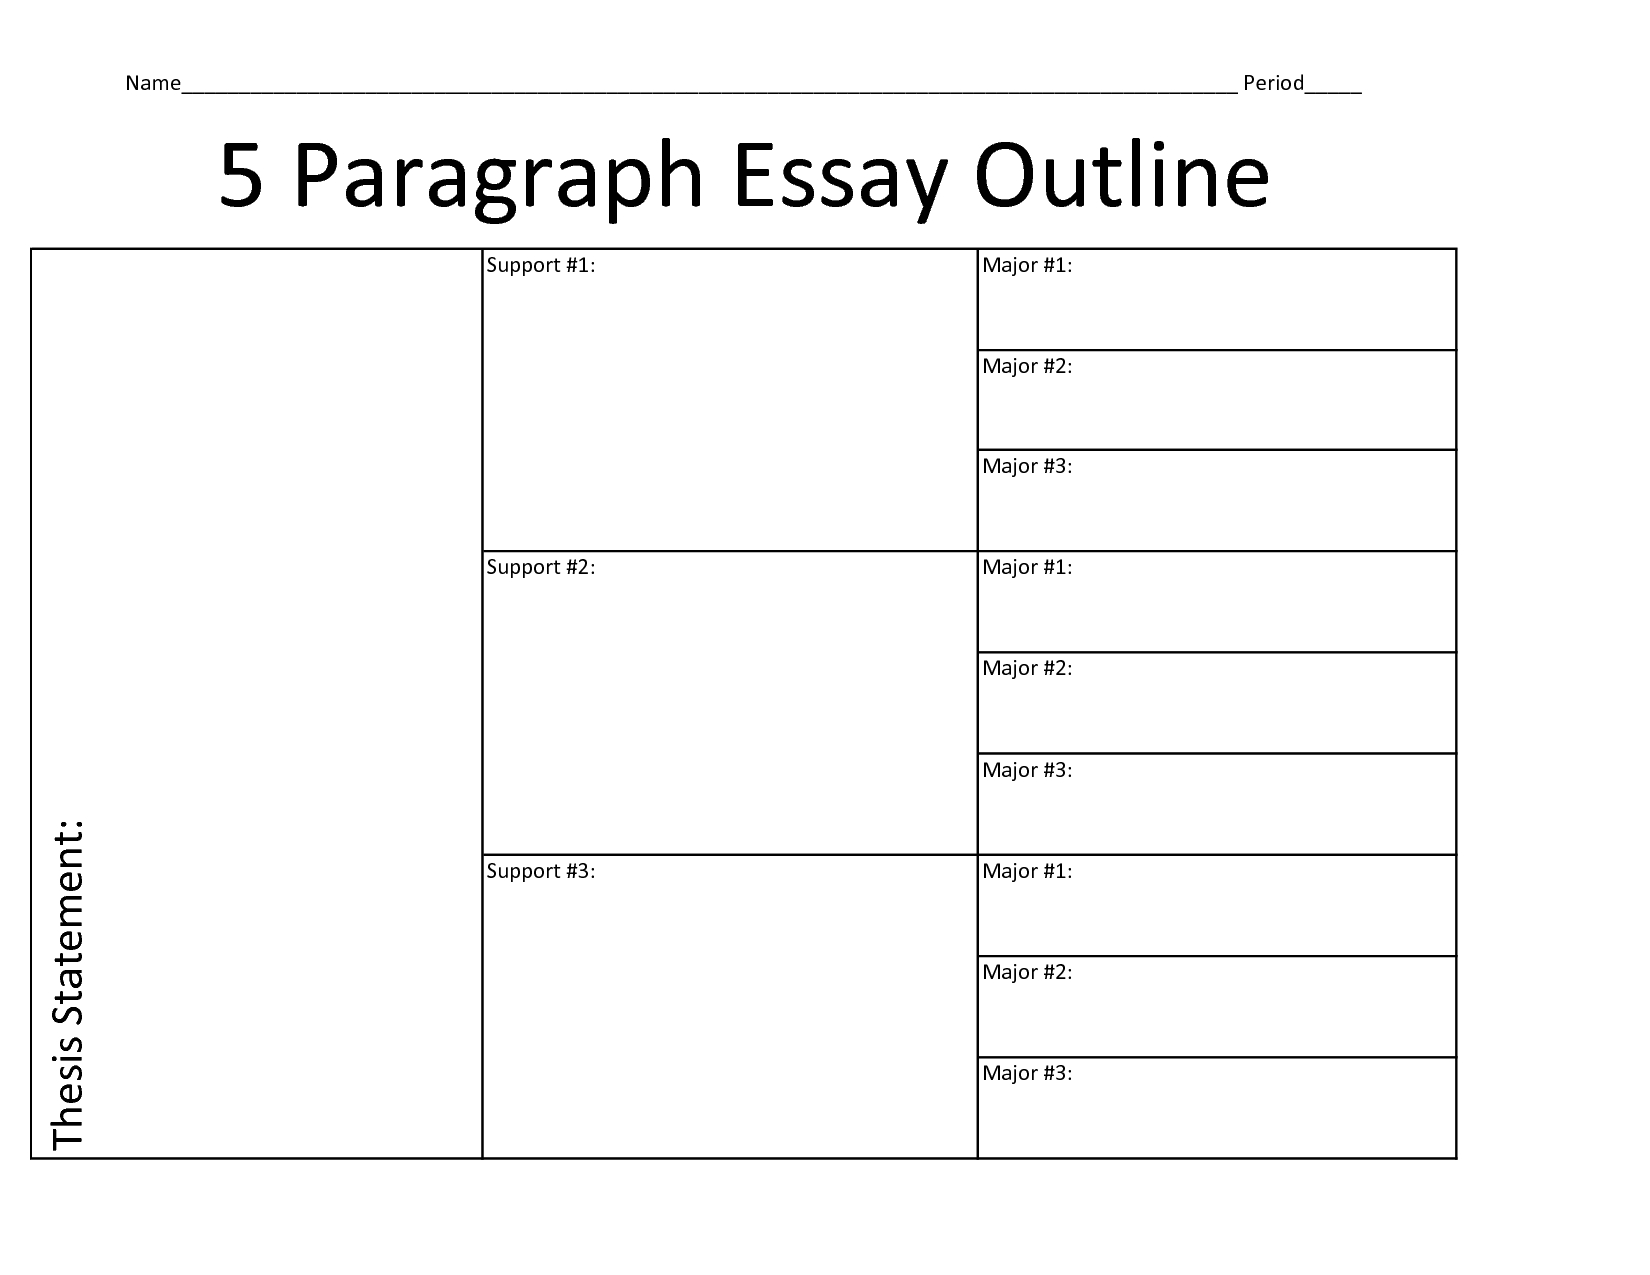 Essay Outline Template | | tryprodermagenix.org